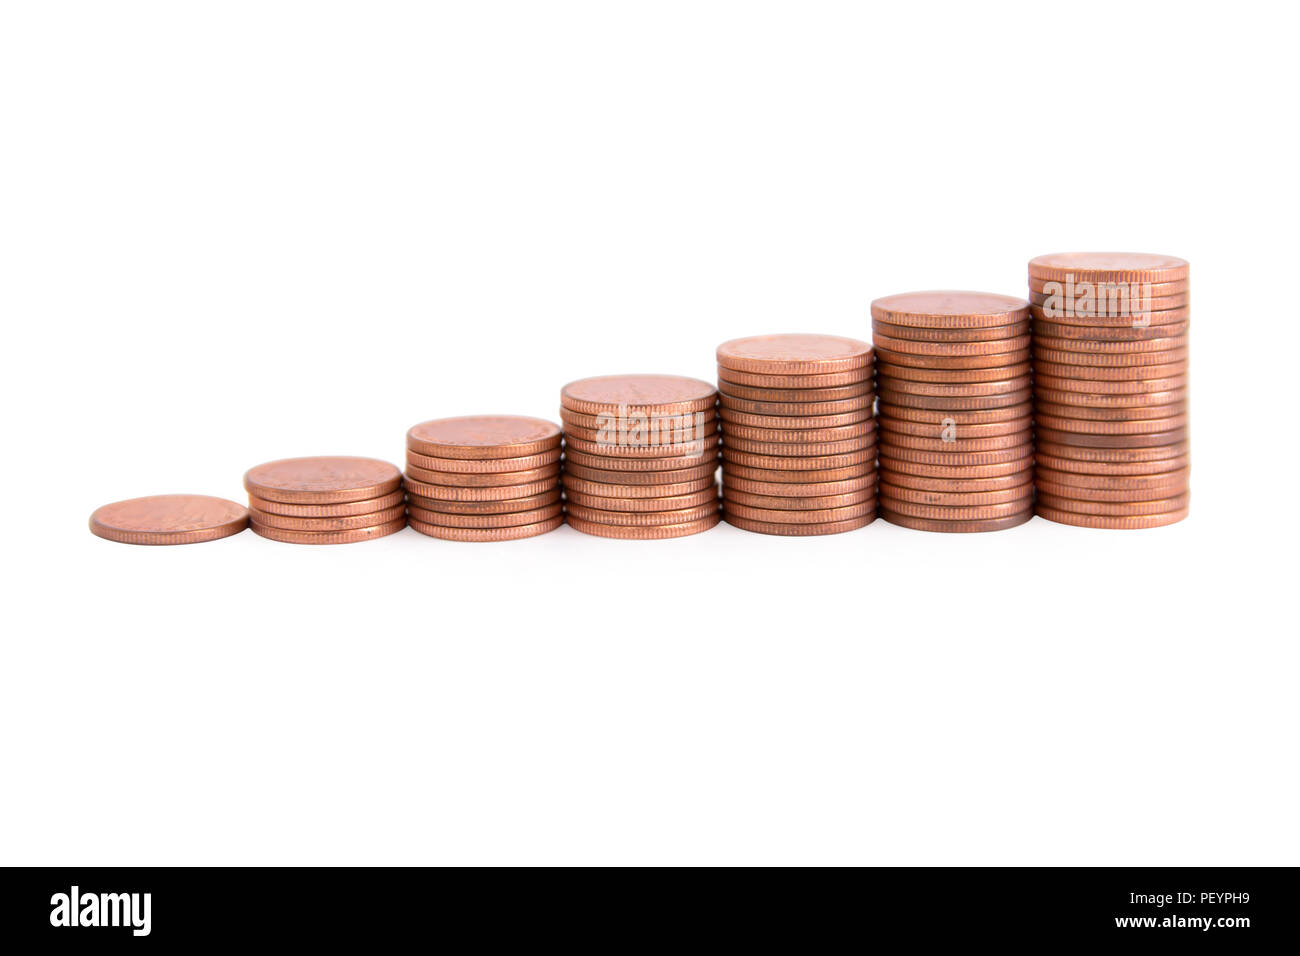 Stacks of copper coins isolated on white background with clipping path Stock Photo